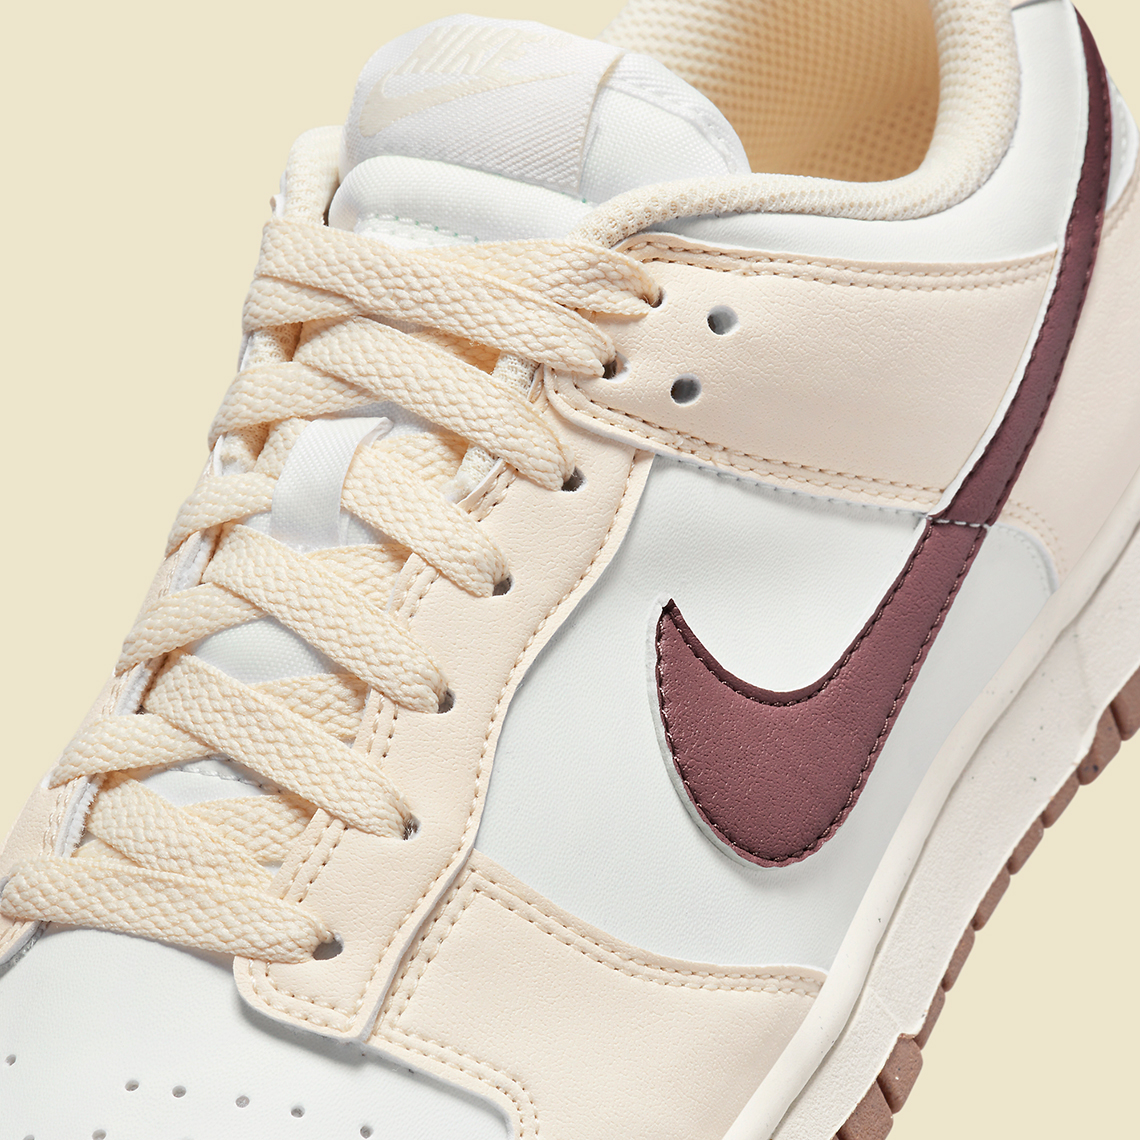 nike air with ridges in top of neck area code Next Nature Coconut Milk Smokey Mauve Dd1873 103 4